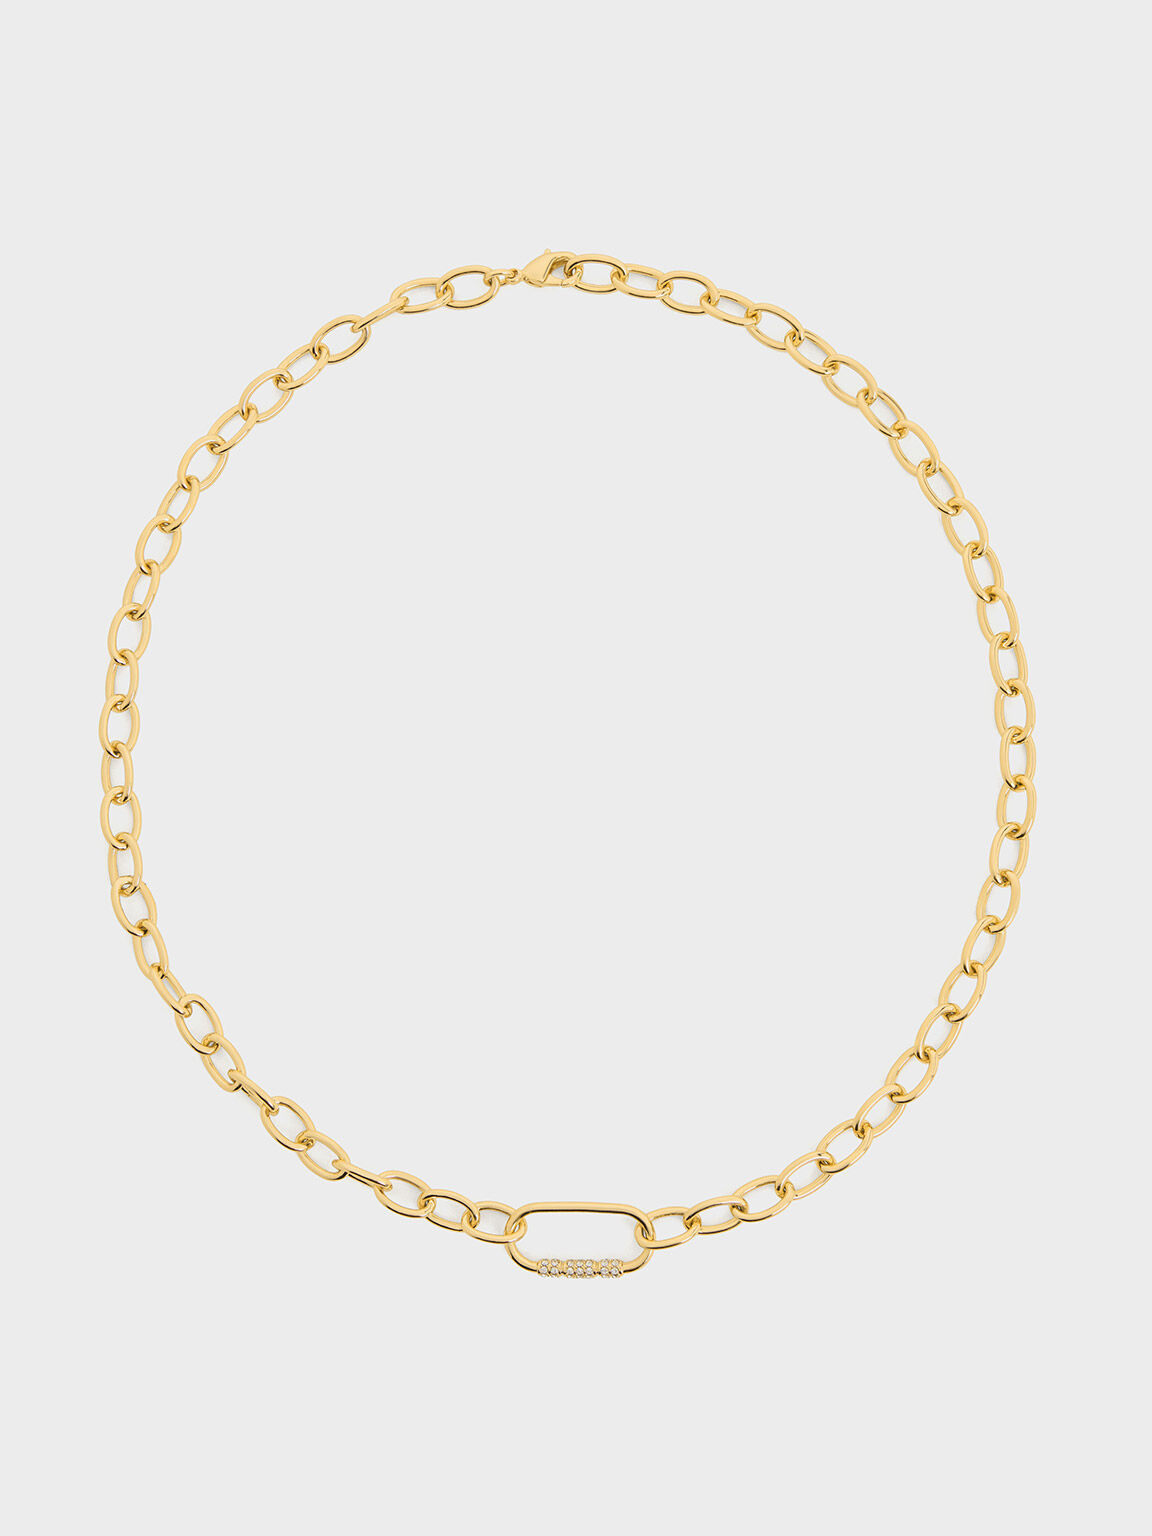 Reagan Crystal Chain-Link Necklace, Gold, hi-res